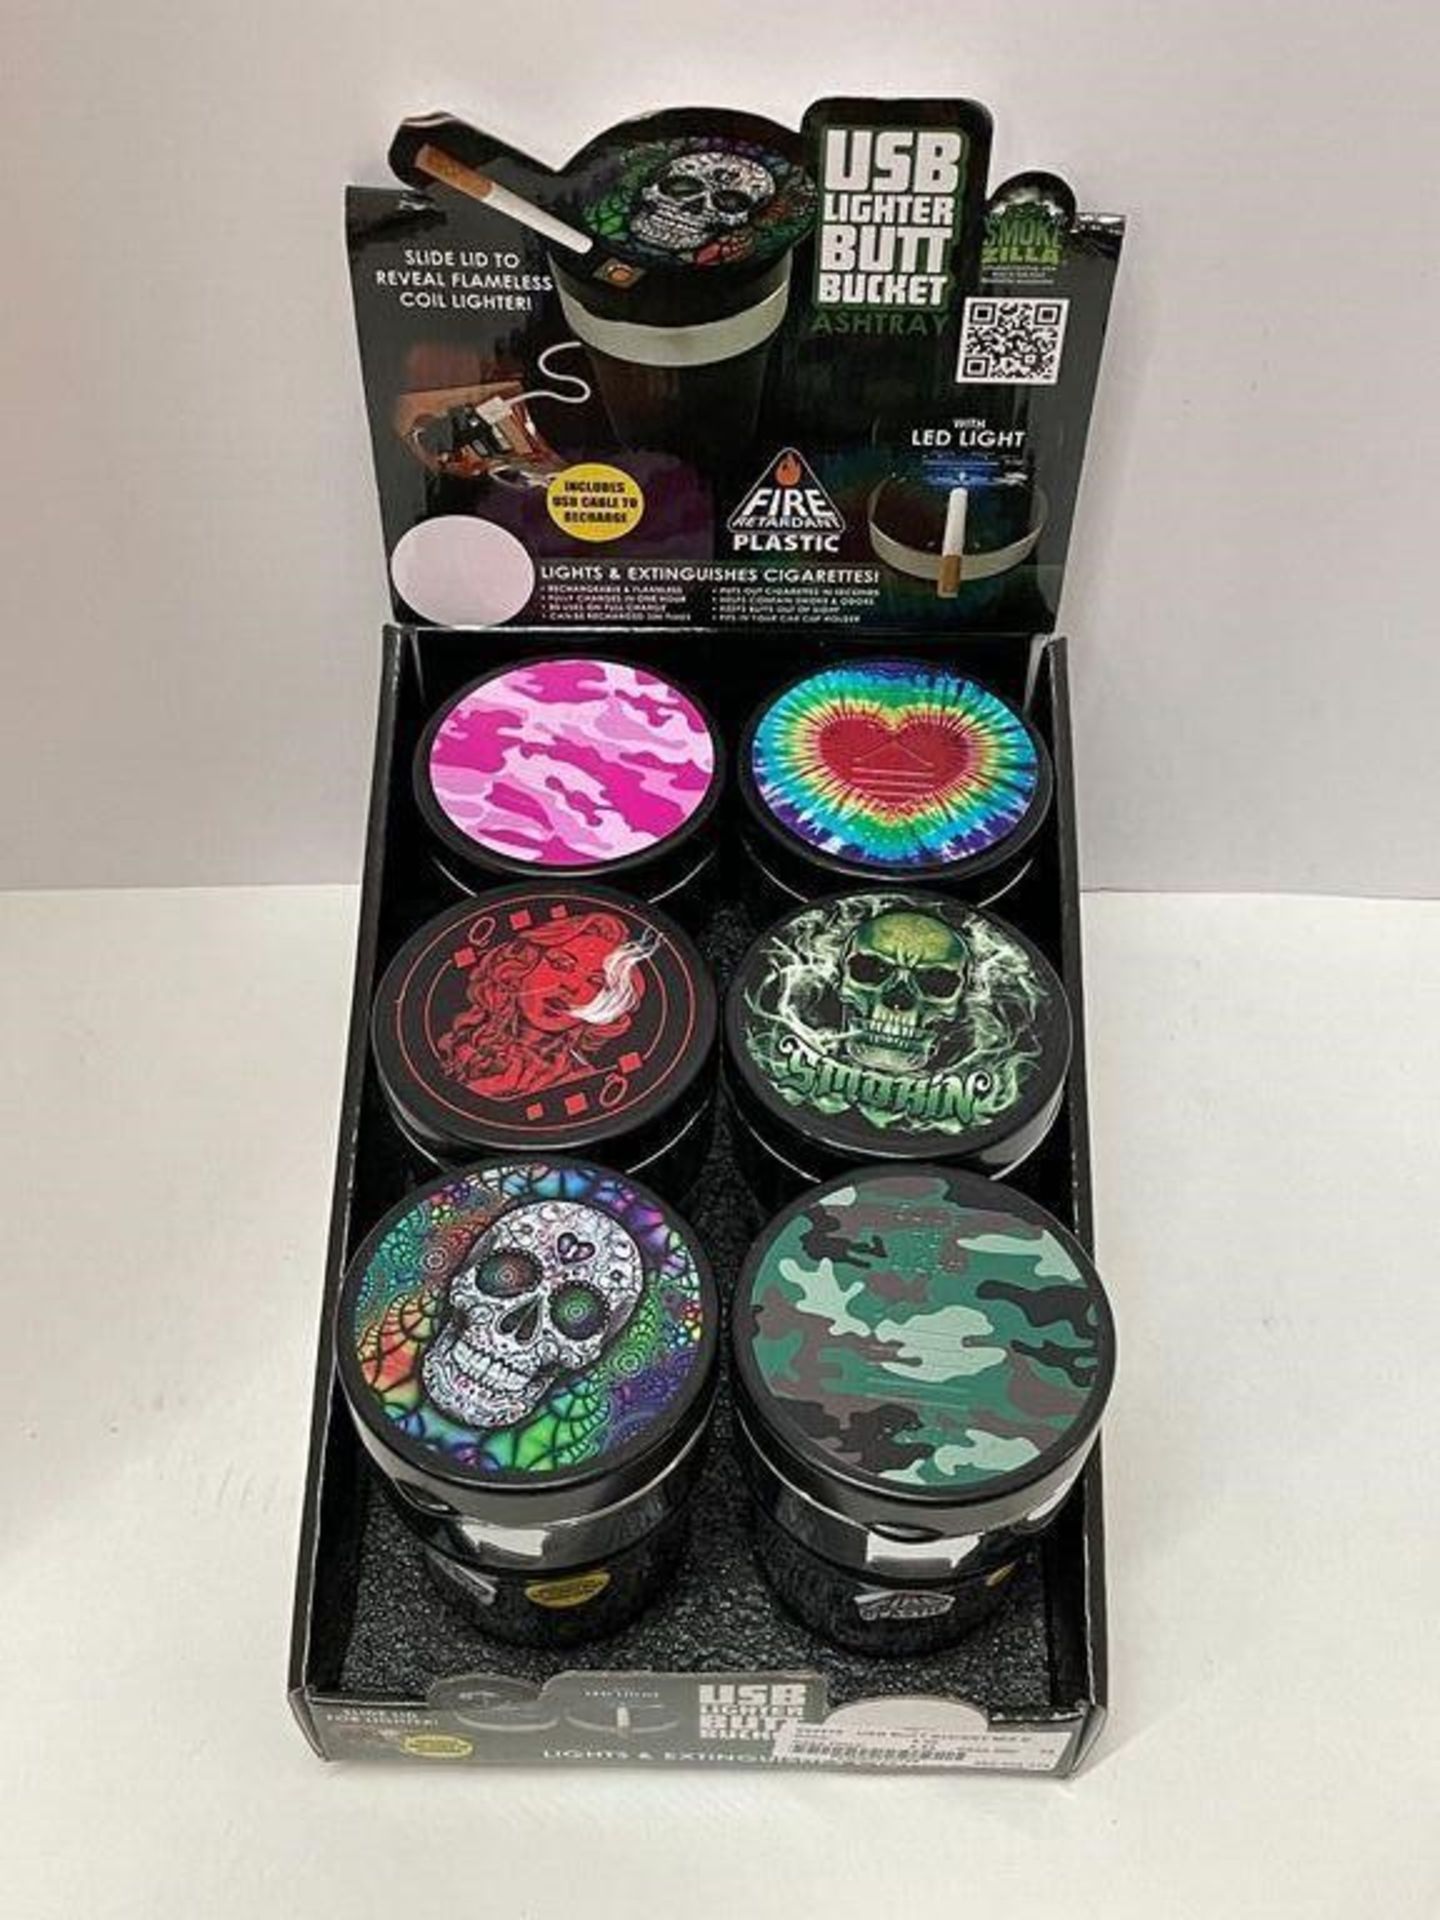 6 X USB LIGHTER BUTT BUCKET ASHTRAYS WITH LED LIGHTS IN DISPLAY CASE